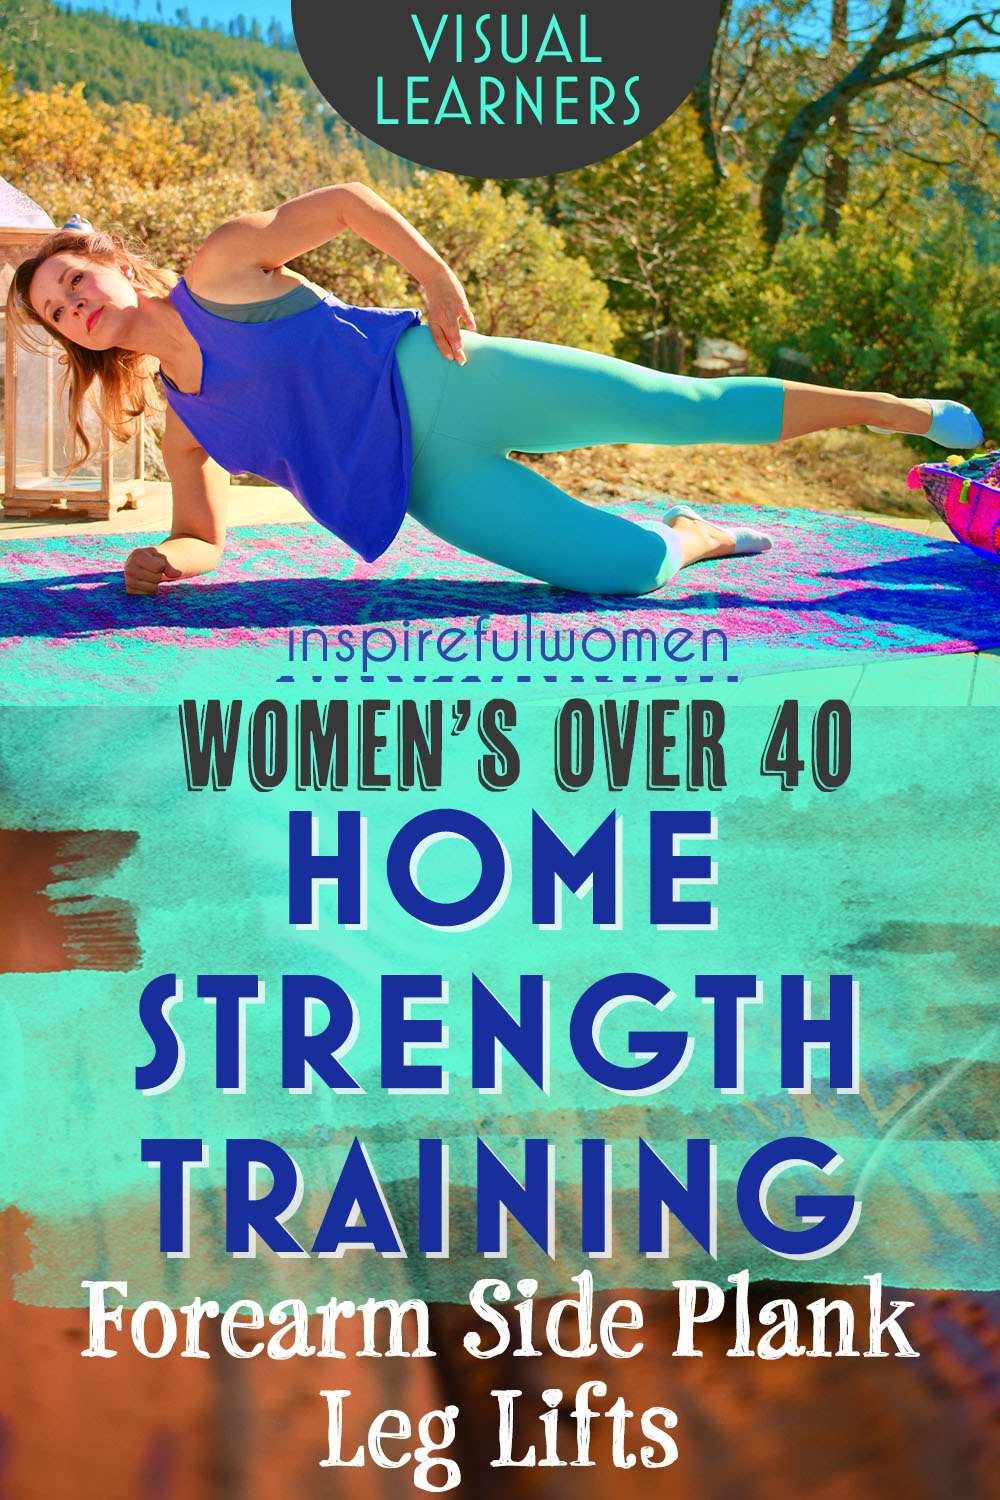 elbow-side-plank-leg-raise-glute-strength-training-at-home-women-over-40